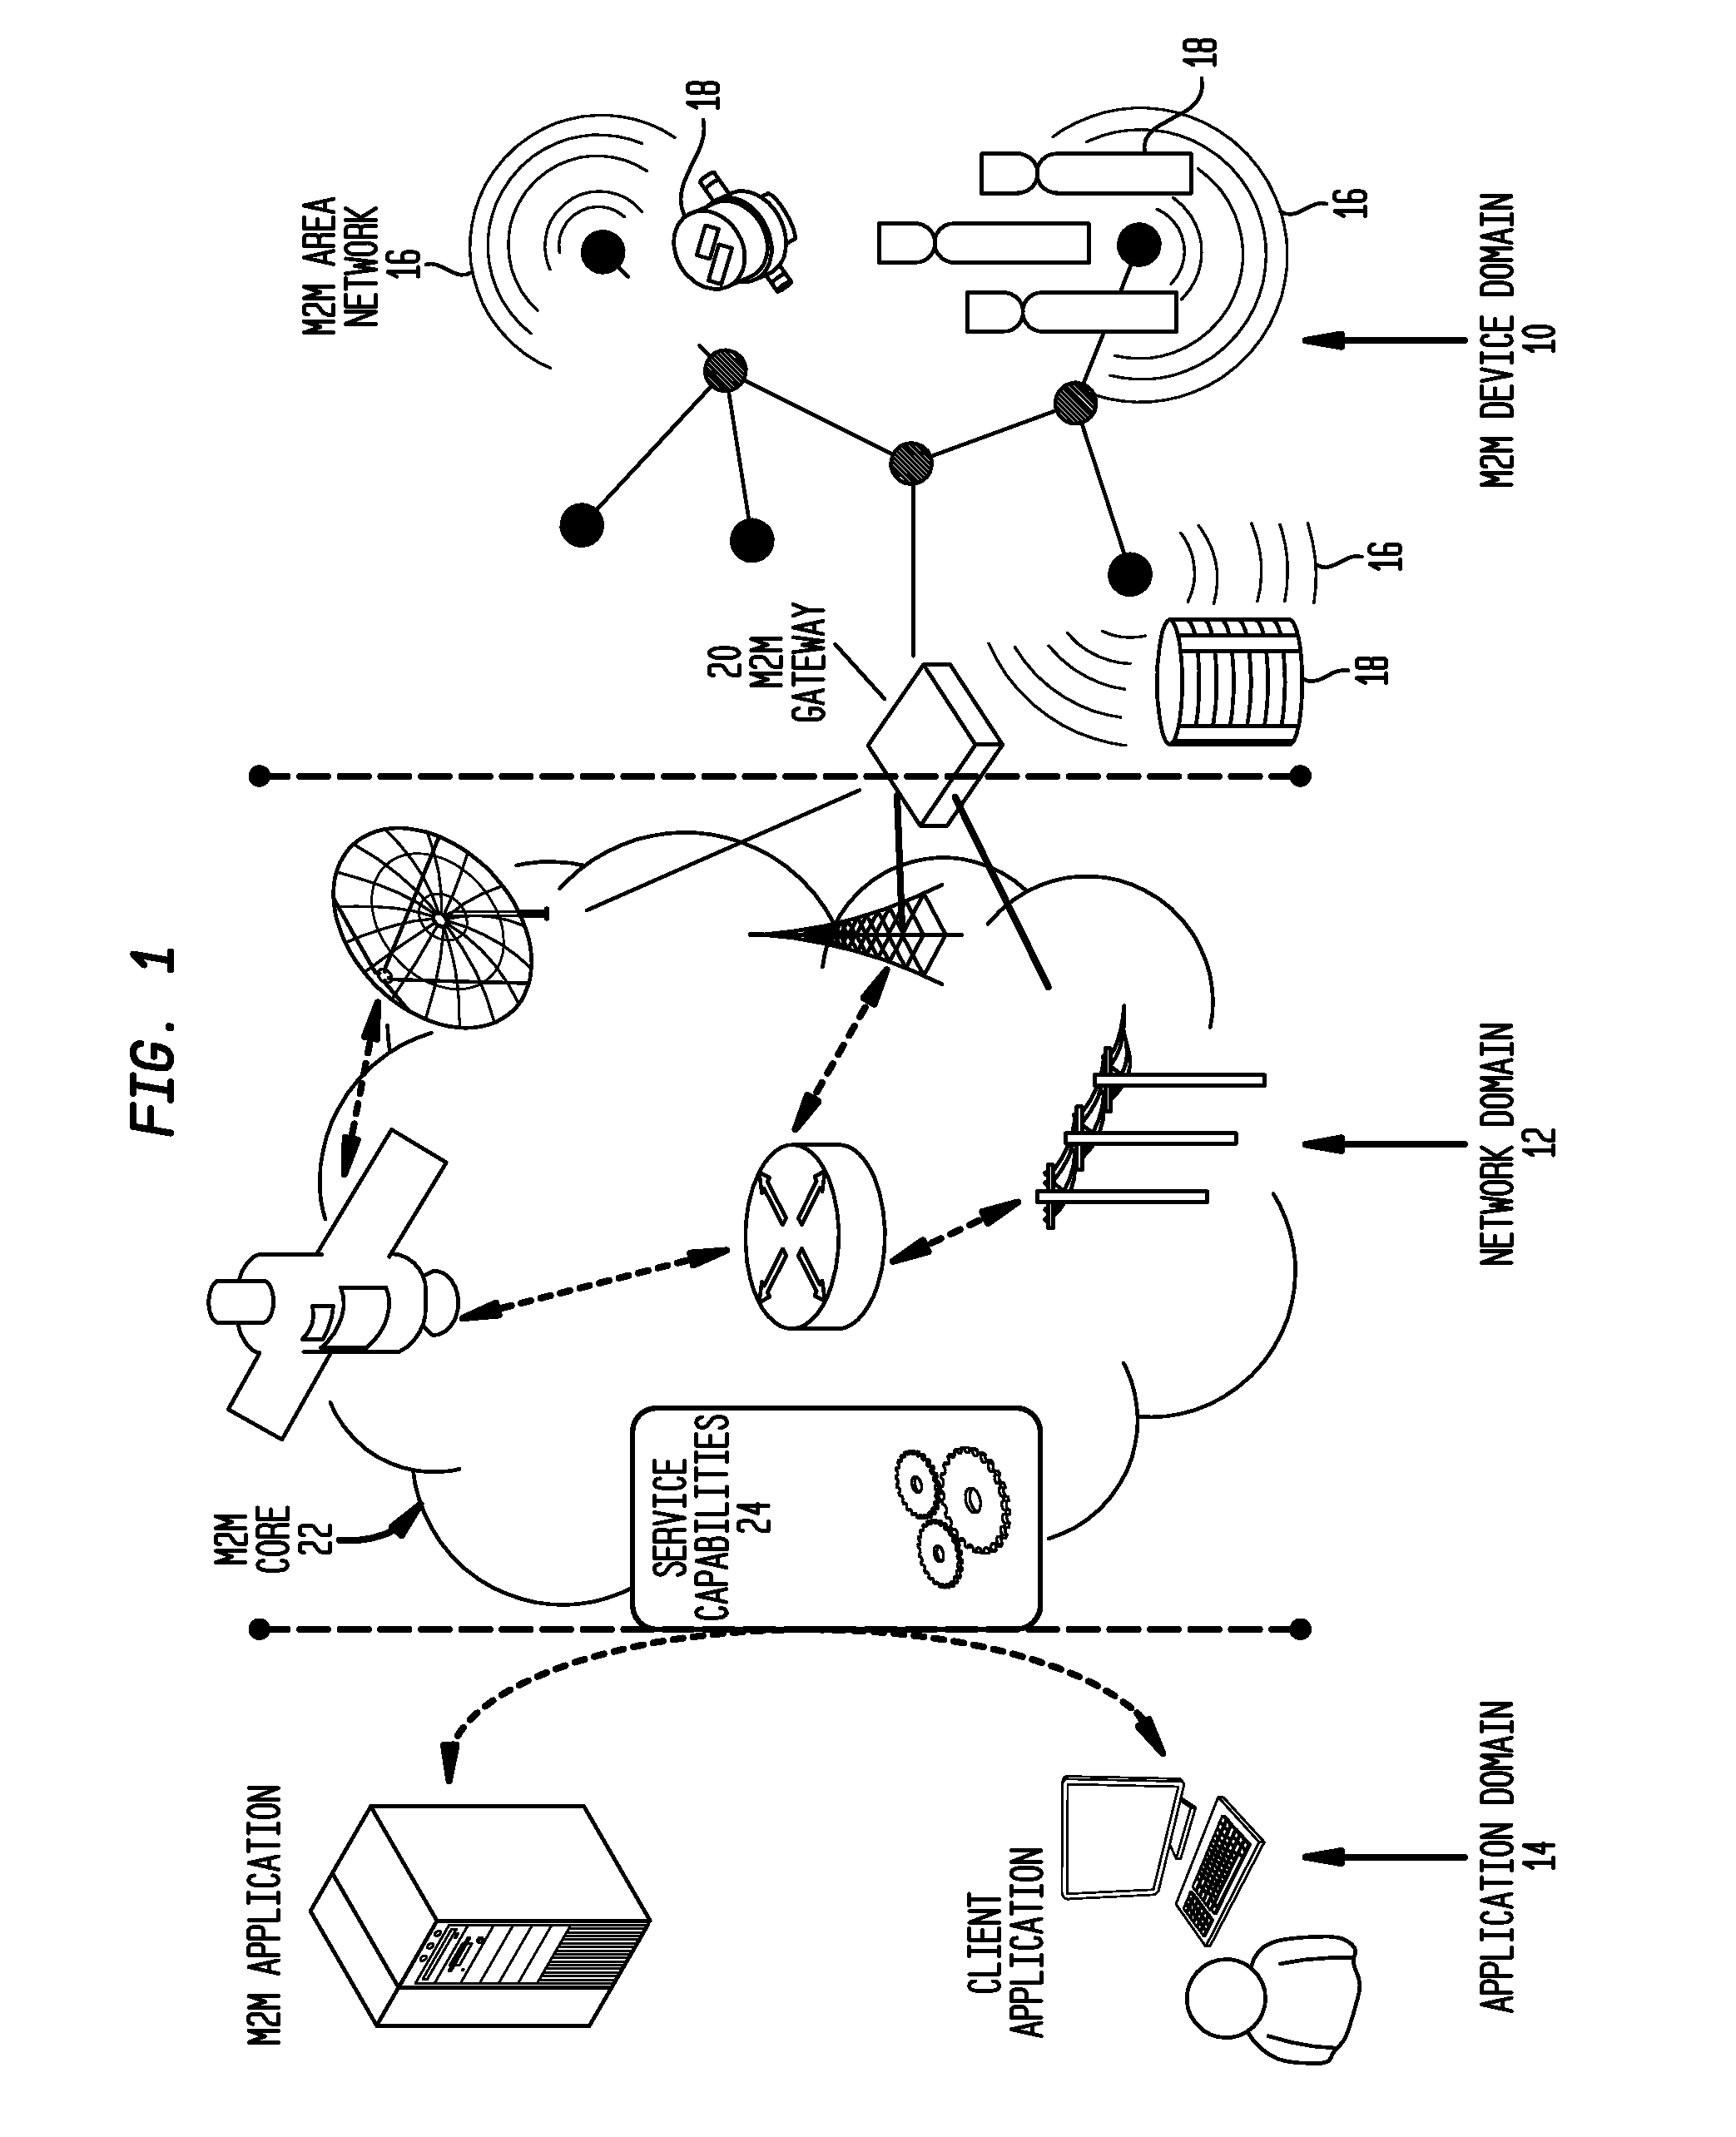 System and Method for Group Communications in 3GPP Machine-to-Machine Networks